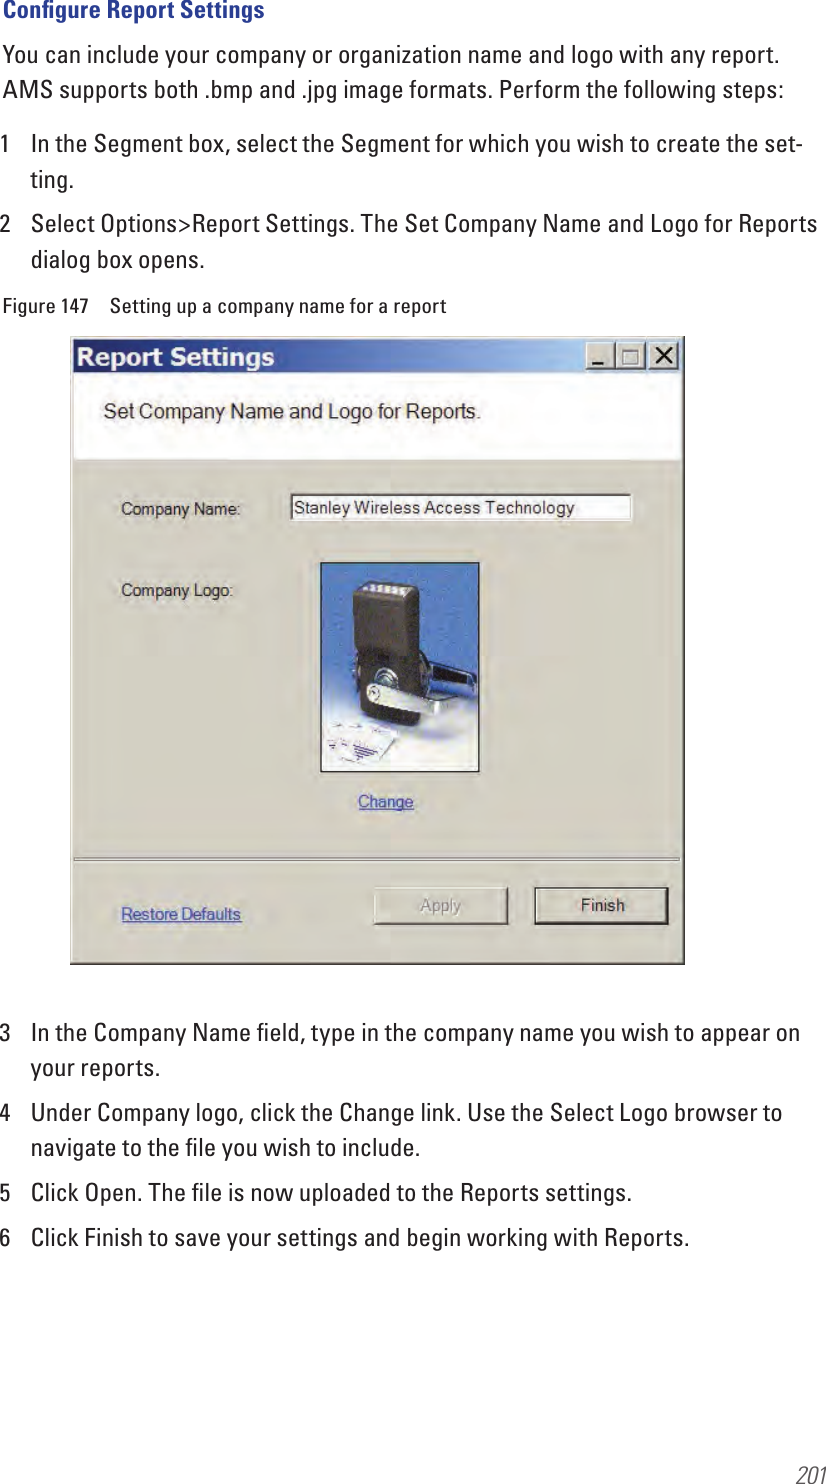 201Conﬁgure Report SettingsYou can include your company or organization name and logo with any report. AMS supports both .bmp and .jpg image formats. Perform the following steps:1  In the Segment box, select the Segment for which you wish to create the set-ting.2  Select Options&gt;Report Settings. The Set Company Name and Logo for Reports dialog box opens.Figure 147  Setting up a company name for a report3  In the Company Name ﬁeld, type in the company name you wish to appear on your reports.4  Under Company logo, click the Change link. Use the Select Logo browser to navigate to the ﬁle you wish to include. 5  Click Open. The ﬁle is now uploaded to the Reports settings.6  Click Finish to save your settings and begin working with Reports.